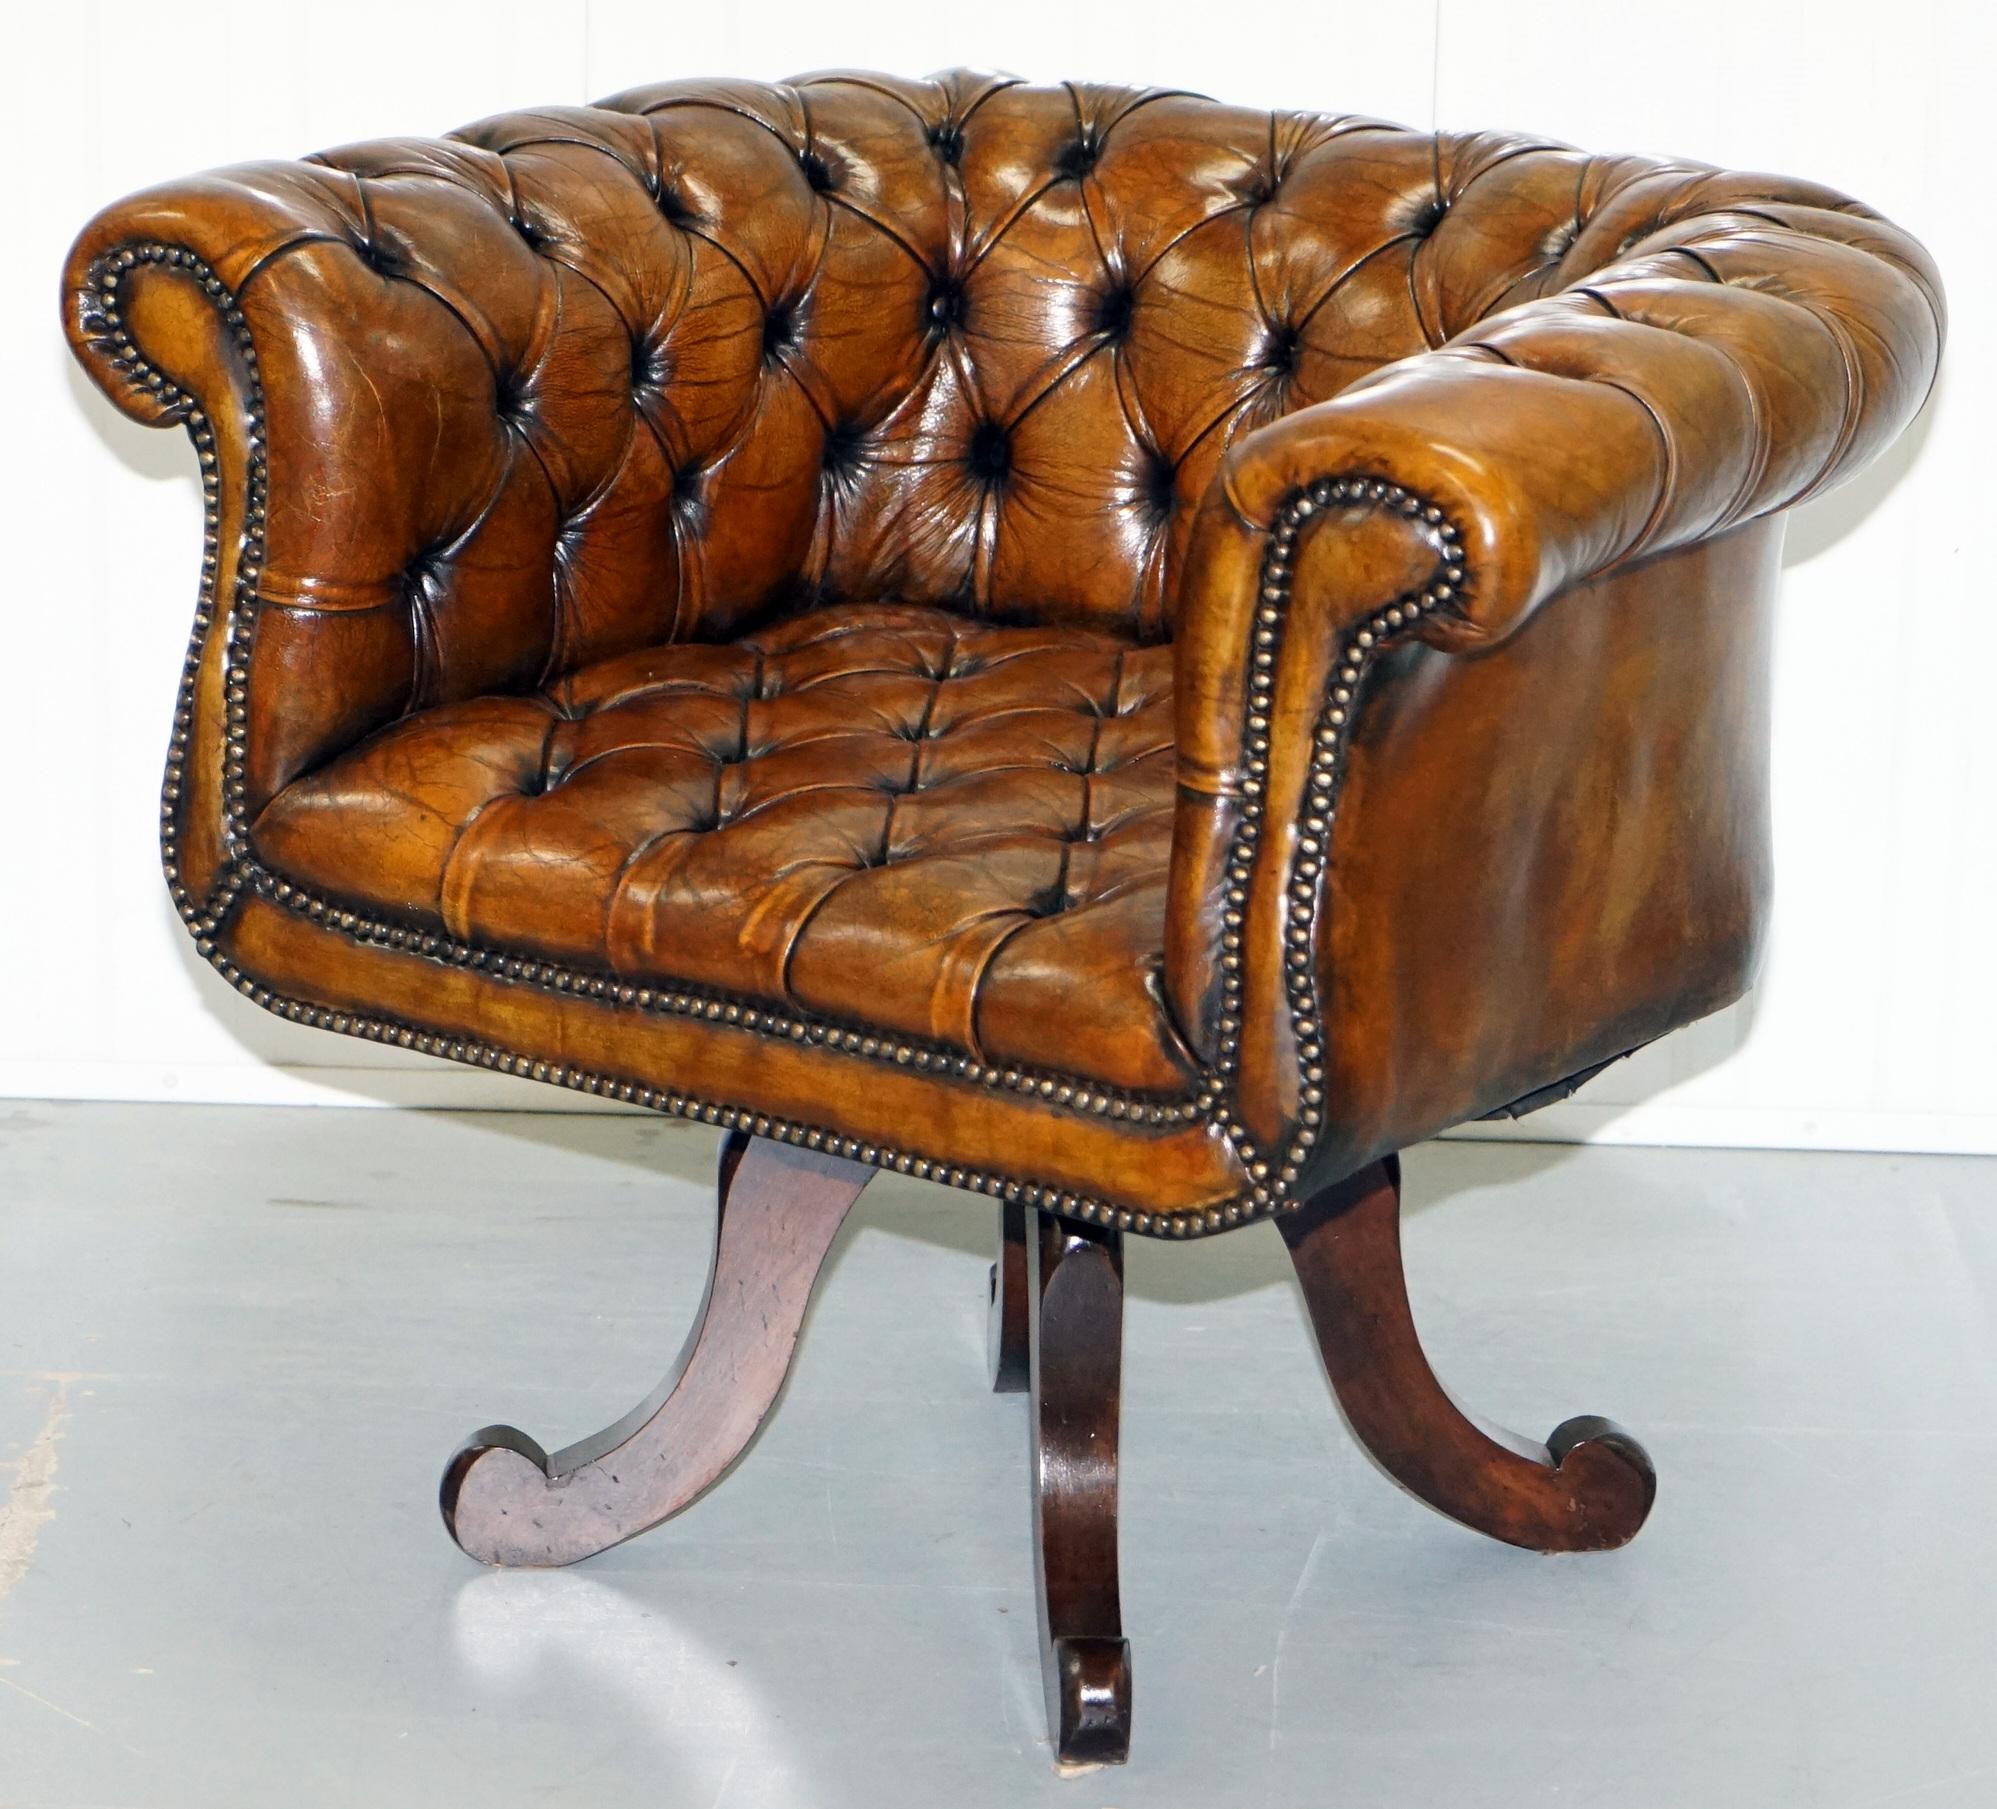 We are delighted to offer for sale 1 of 2 exceptional pair of fully restored period Victorian original Chesterfield club office chairs in Tobacco brown hand-dyed leather upholstery 

This auction is for one with the option to buy the